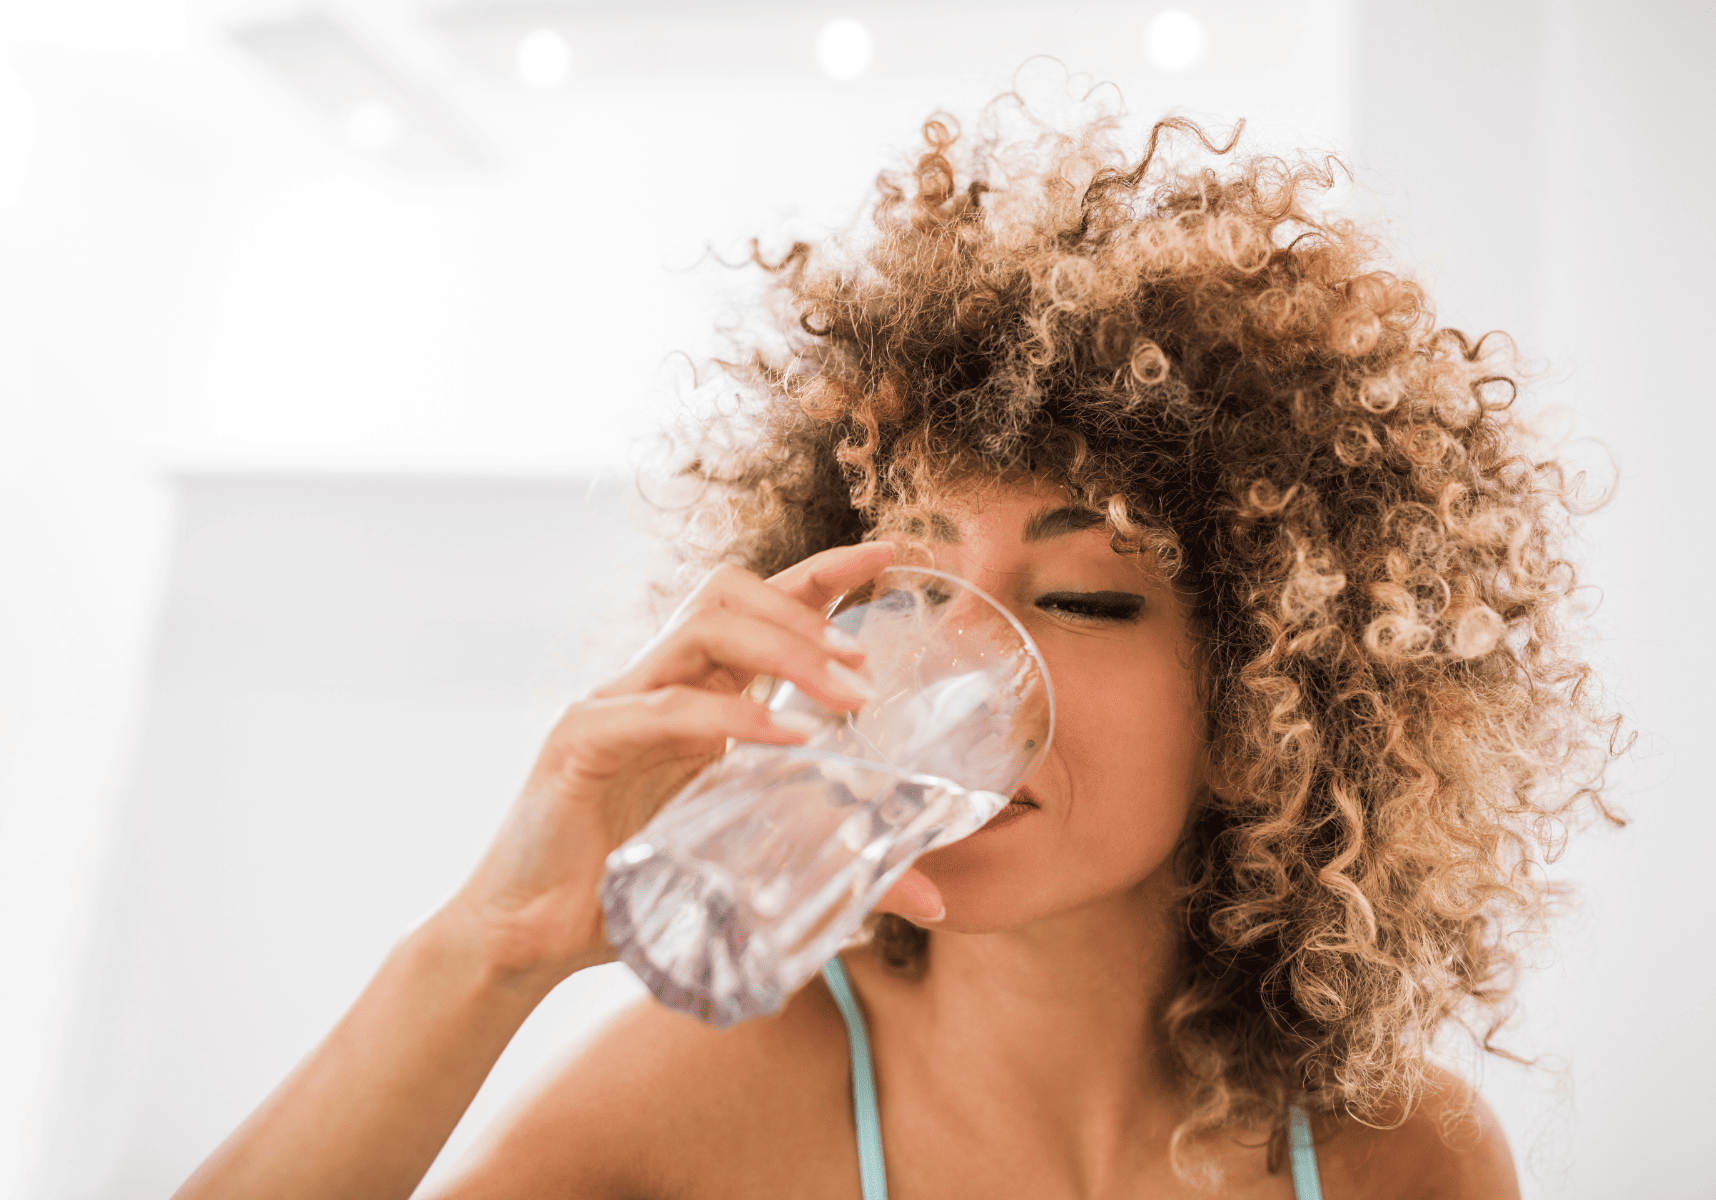 How Long Should You Wait To Drink Water After Yoga?